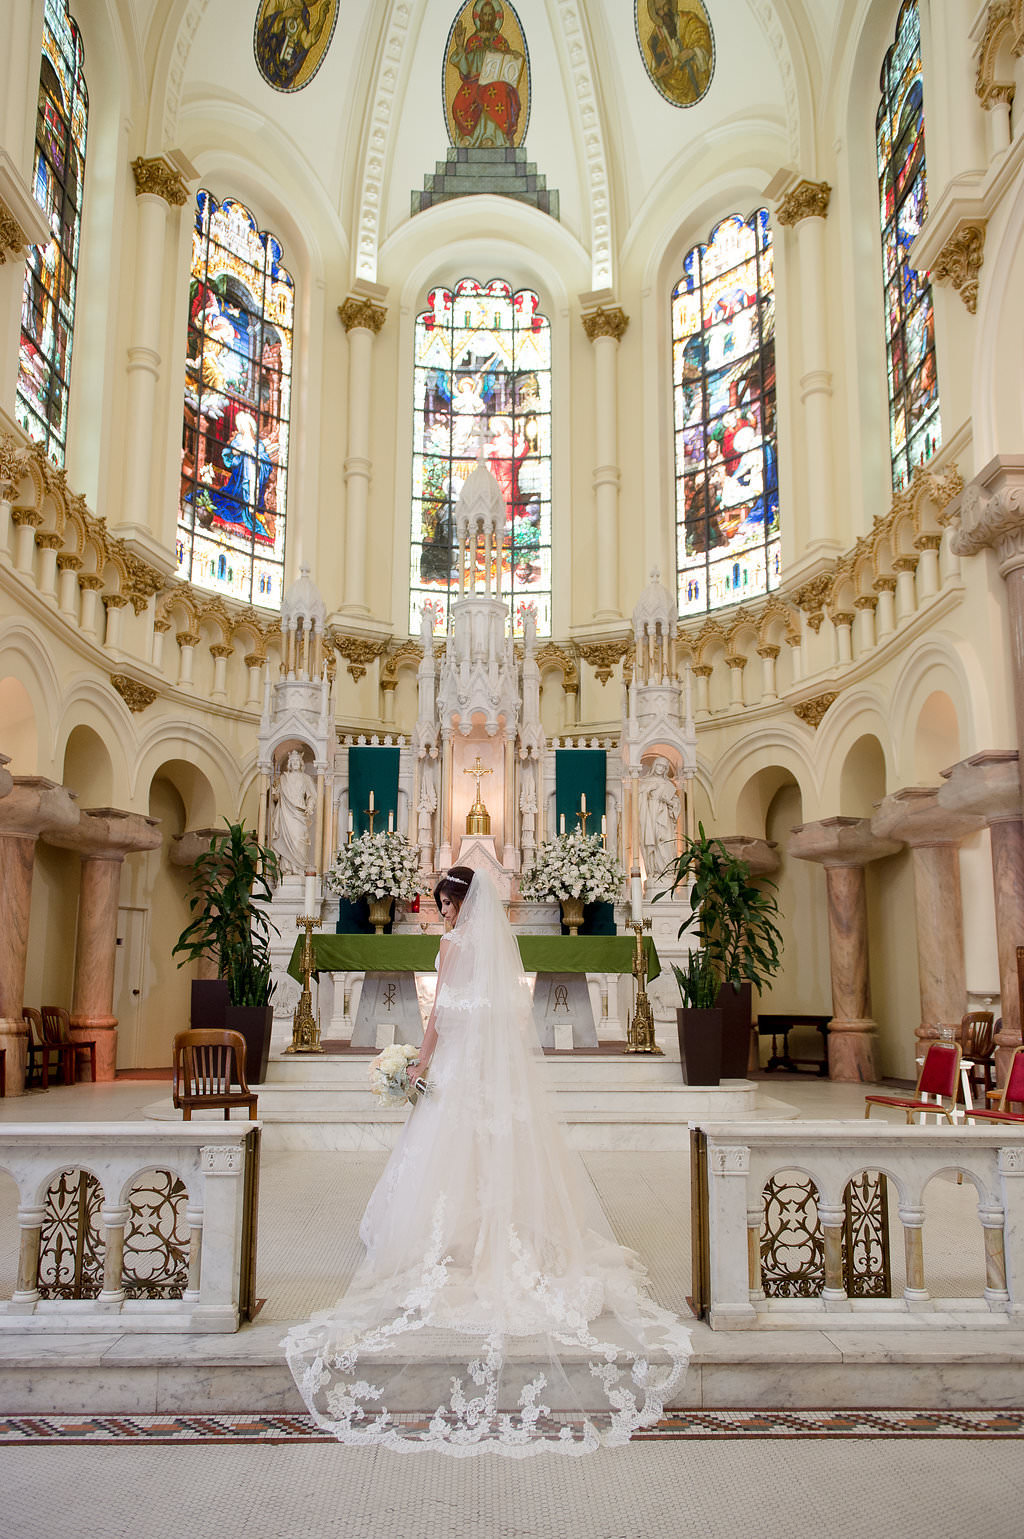 Wedding Ceremony Portrait at Downtown Tampa Traditional Wedding Ceremony Venue Sacred Heart Catholic Church | Tampa Bay Photographer Marc Edwards Photographs